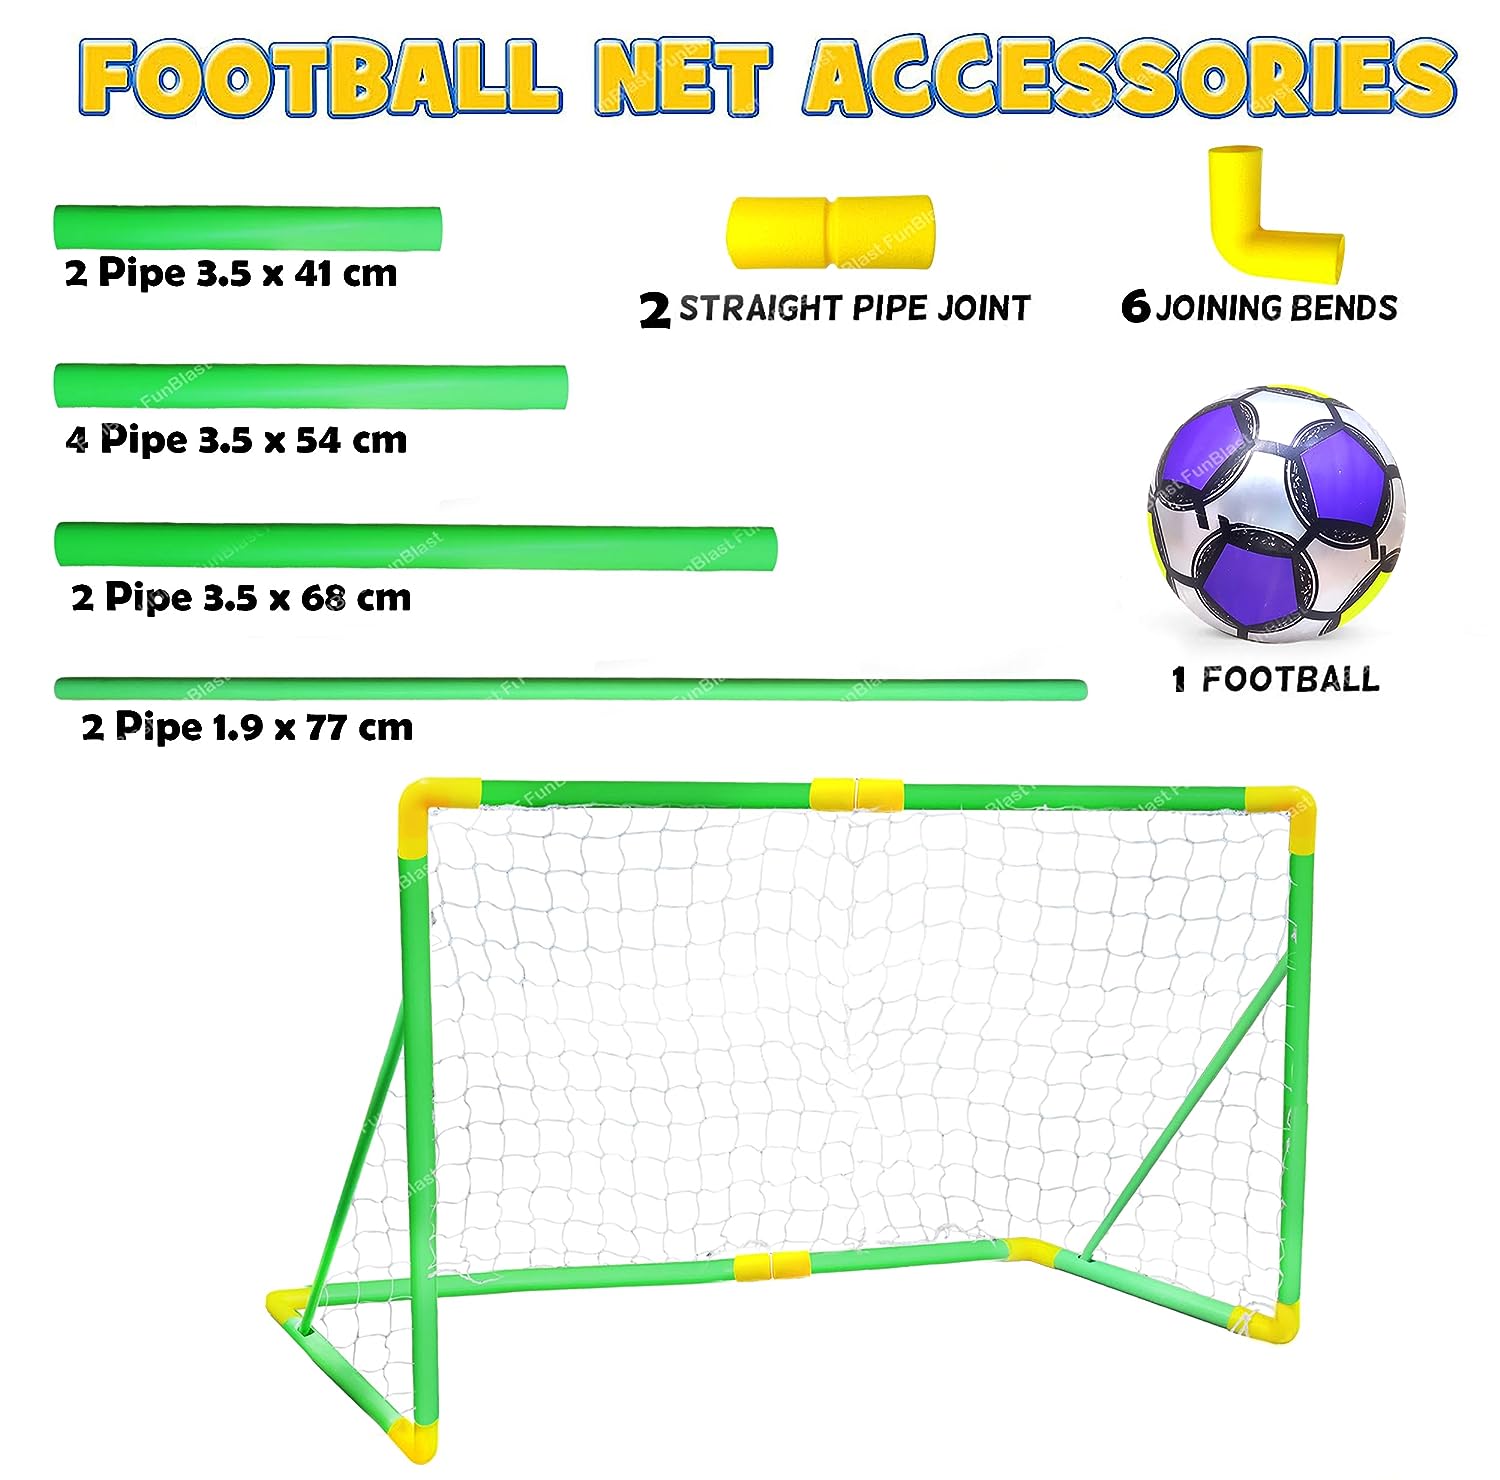 Football Goal Post Net with Ball-Football Set for Backyard Fun Summer Play - Indoor Outdoor Football Sport Games Mini Training Practice Set for 6+ Years Kids, Boys, Girls